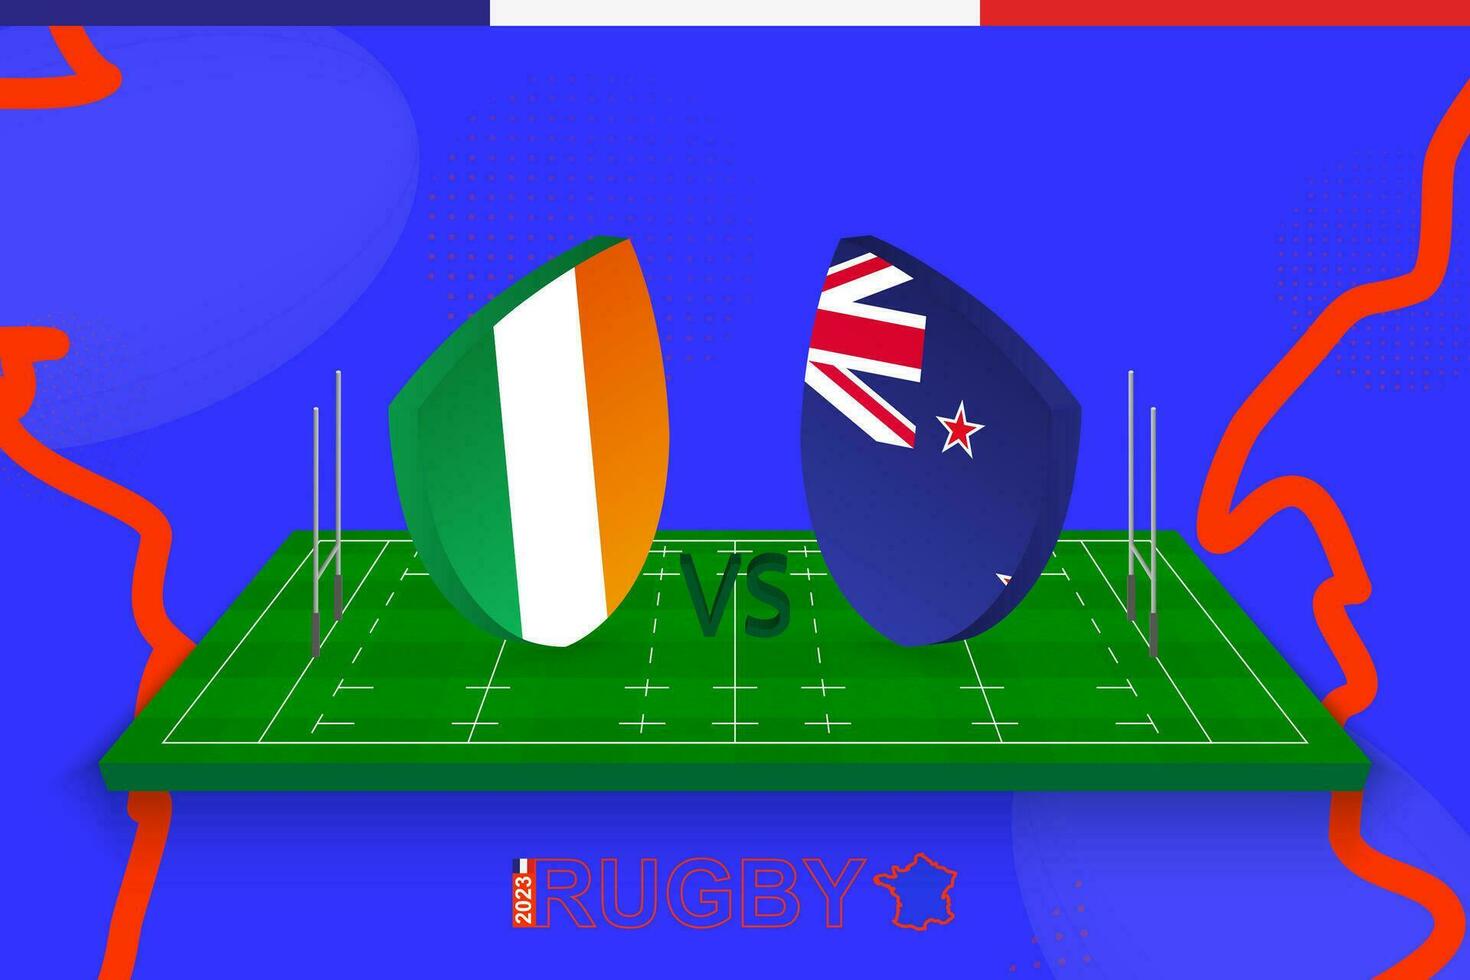 Rugby team Ireland vs New Zealand on rugby field. Rugby stadium on abstract background for Quarter-final of international championship. vector